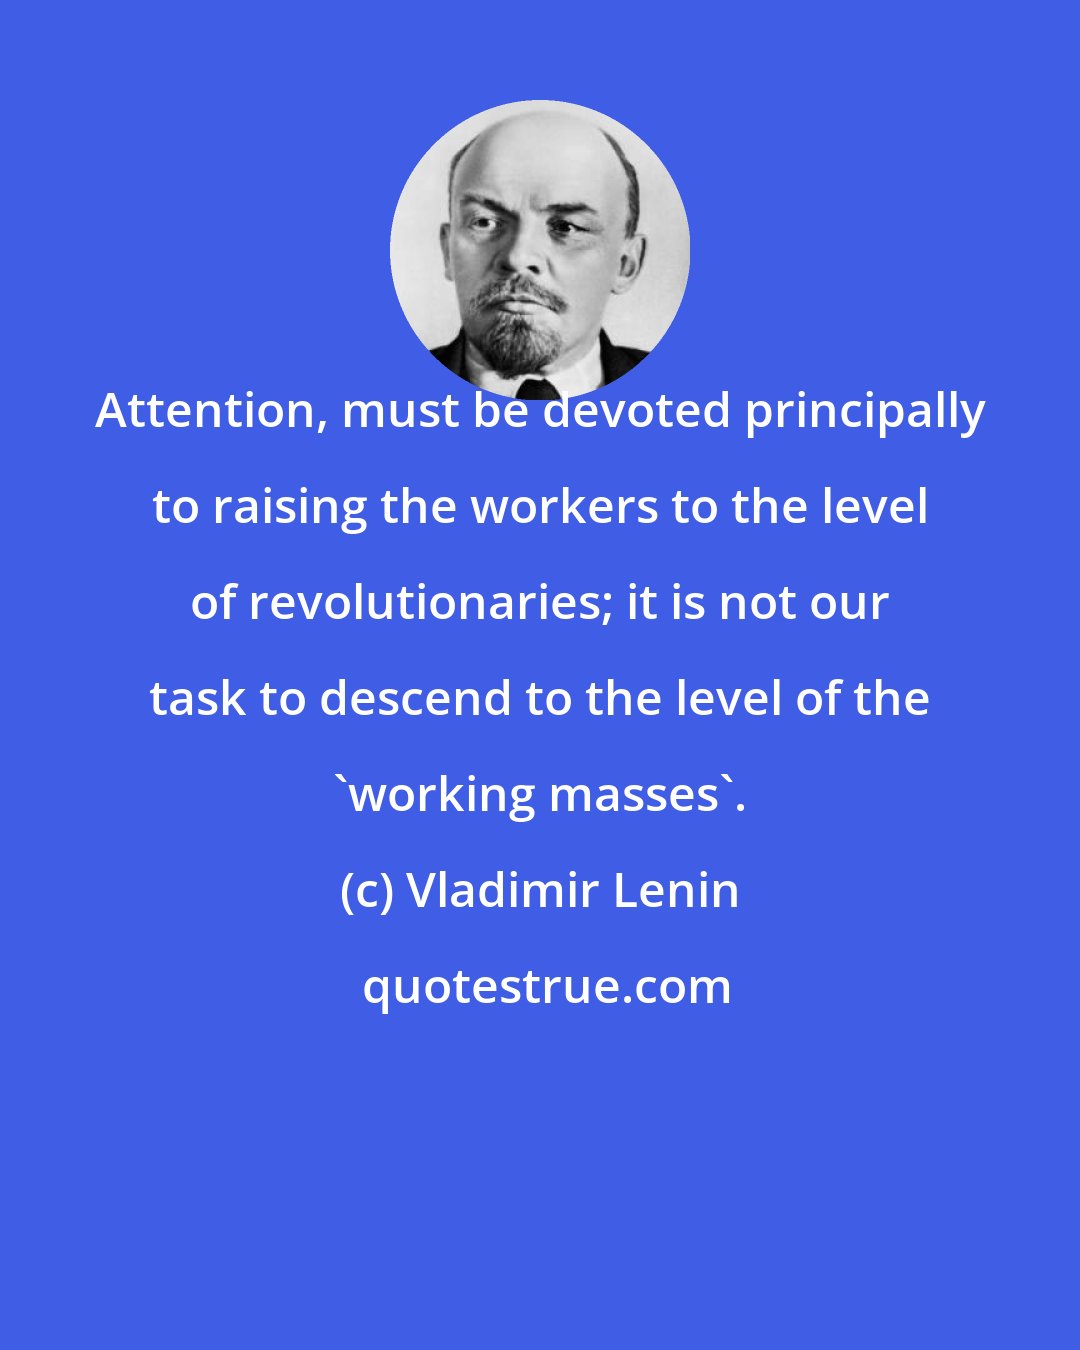 Vladimir Lenin: Attention, must be devoted principally to raising the workers to the level of revolutionaries; it is not our task to descend to the level of the 'working masses'.